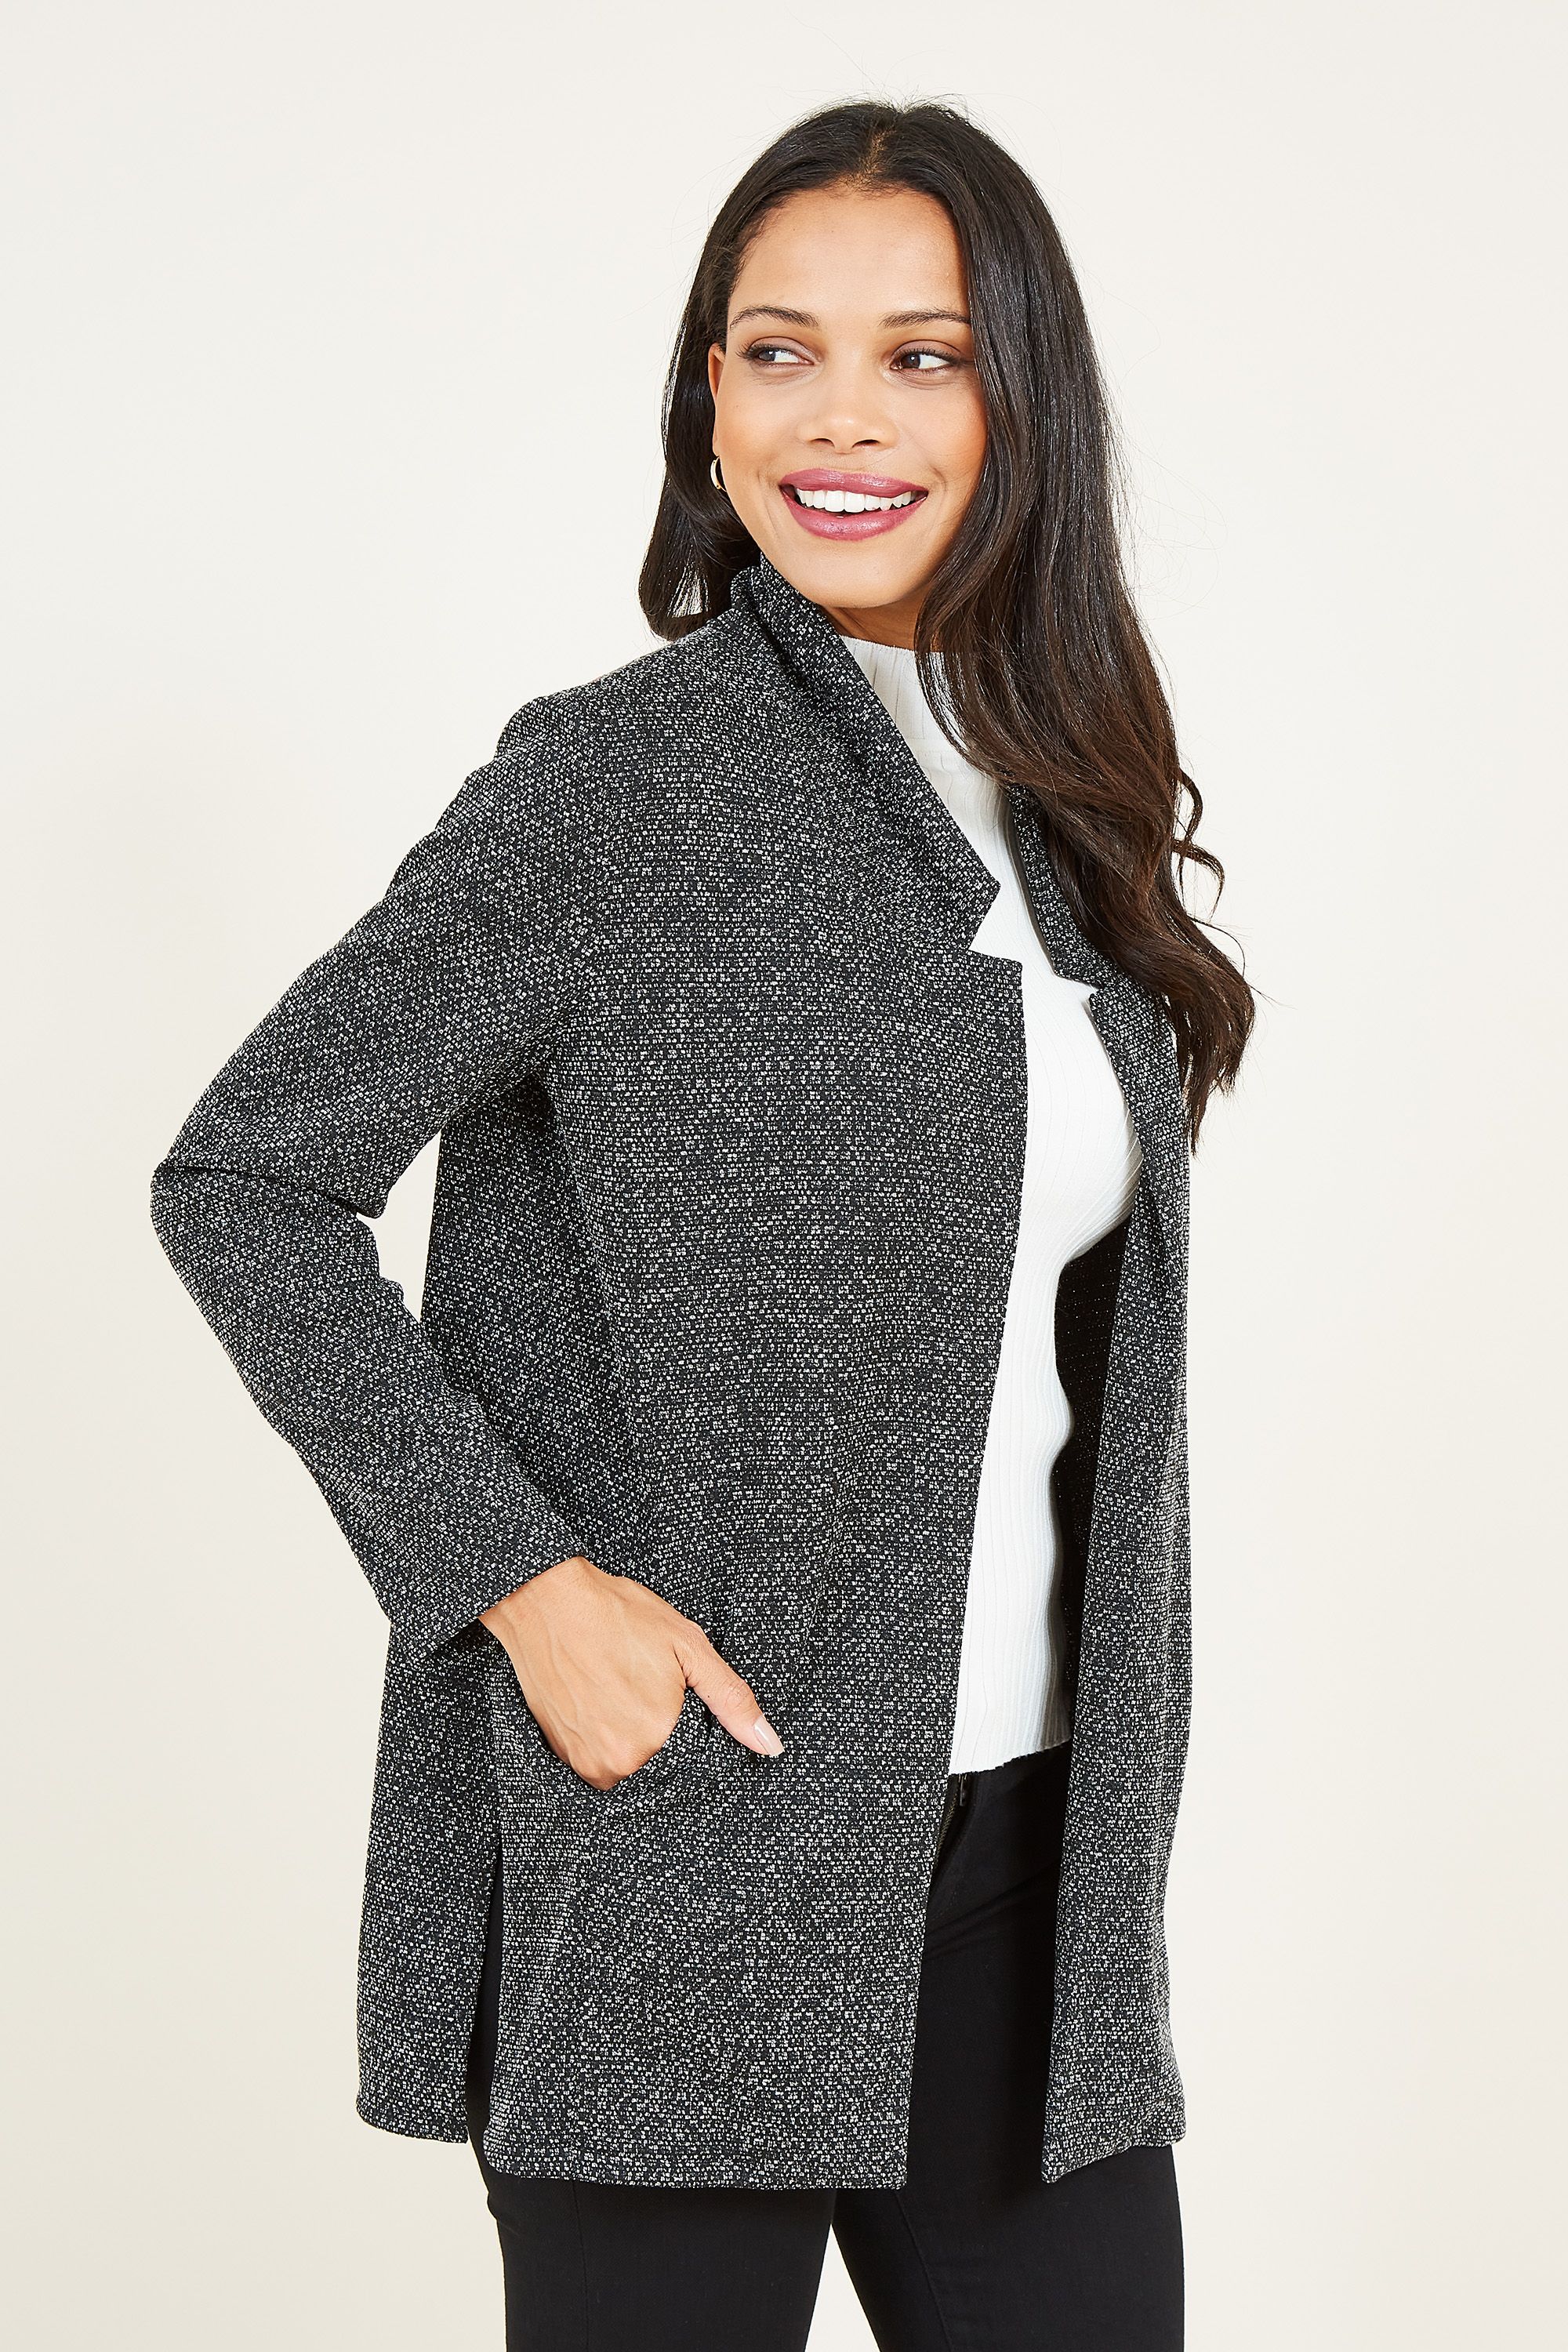 Perfect for adding an extra touch of warmth to your look, opt for this Mela Textured Jacket. With a relaxed silhouette that's perfect for throwing on over your off-duty look, it's cut from soft knitted fabric. Long sleeves add modern shaping, whilst the textured fabric is both soft-to-touch and a style feature.